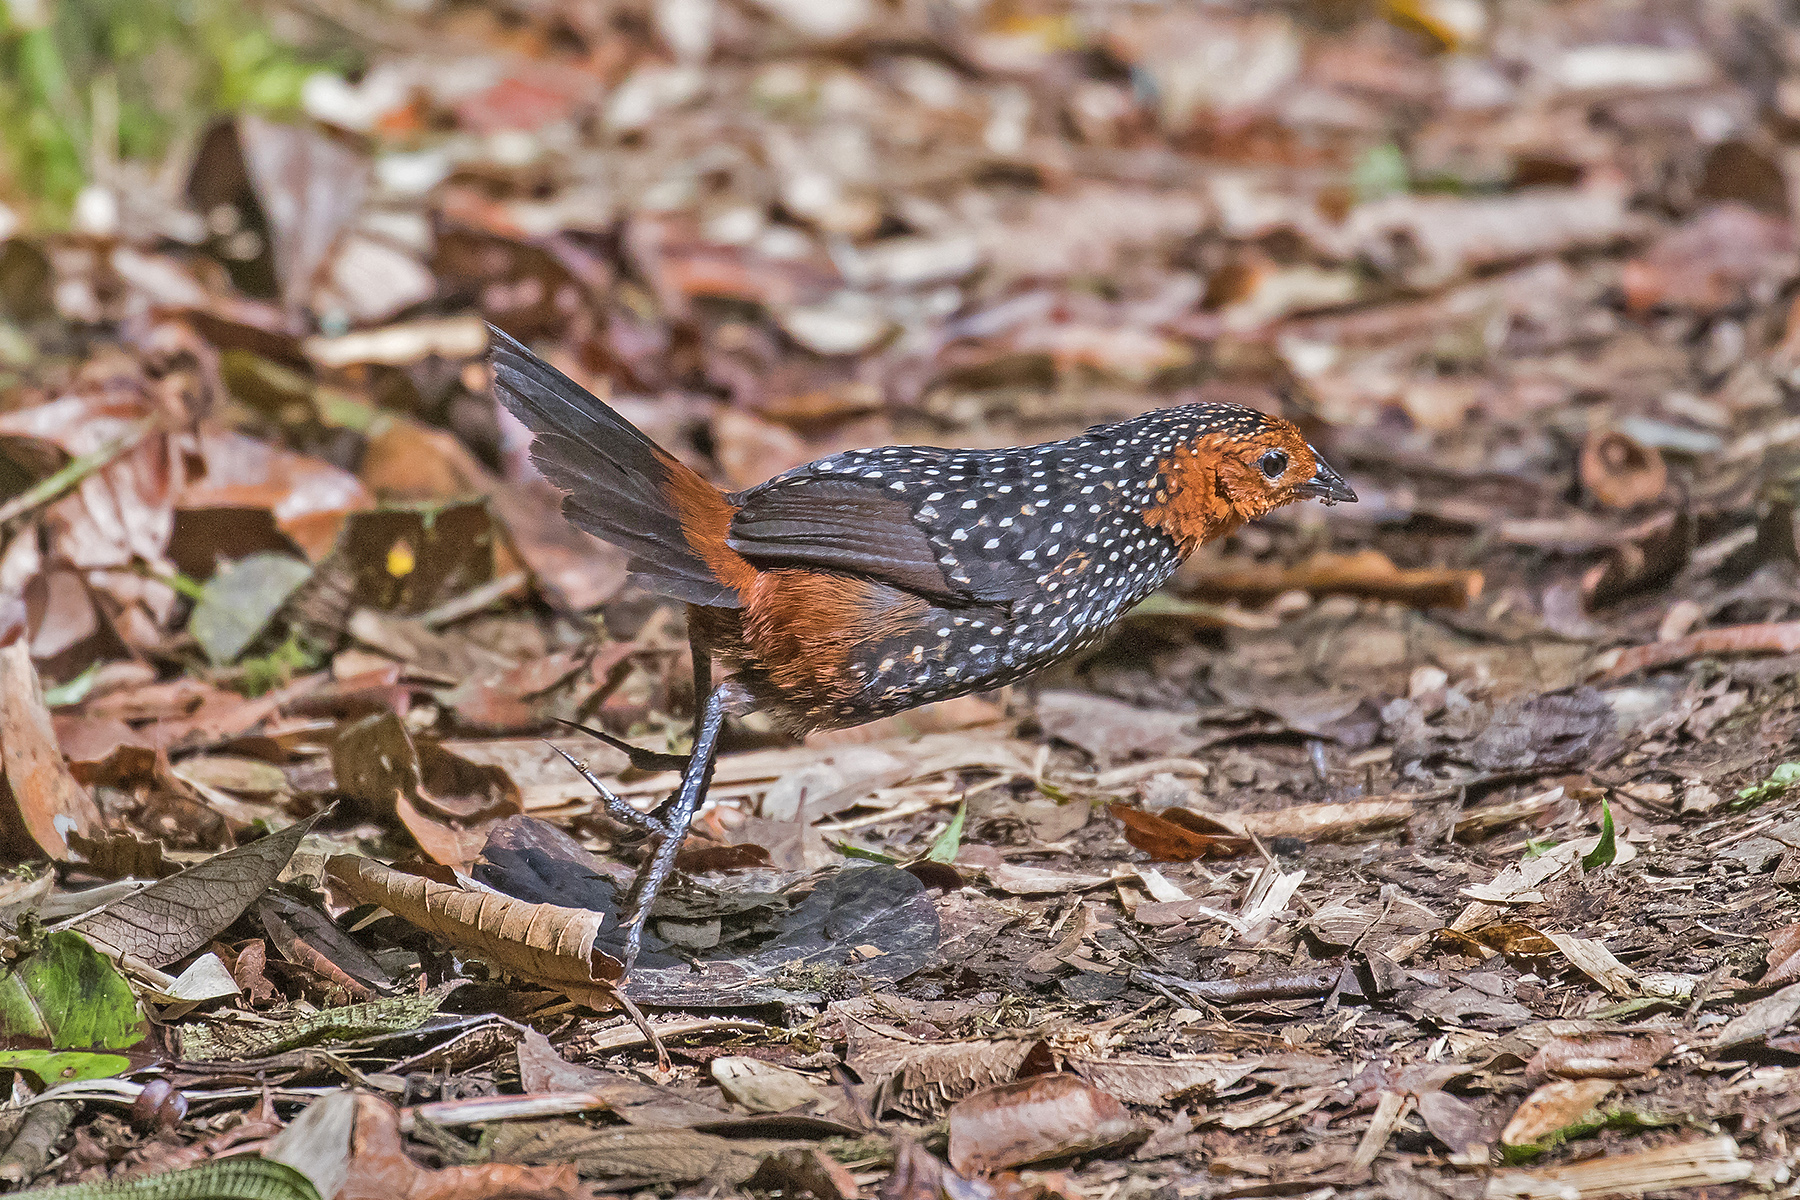 Ocellated Tapaculo in Ecuador (image by Pete Morris)